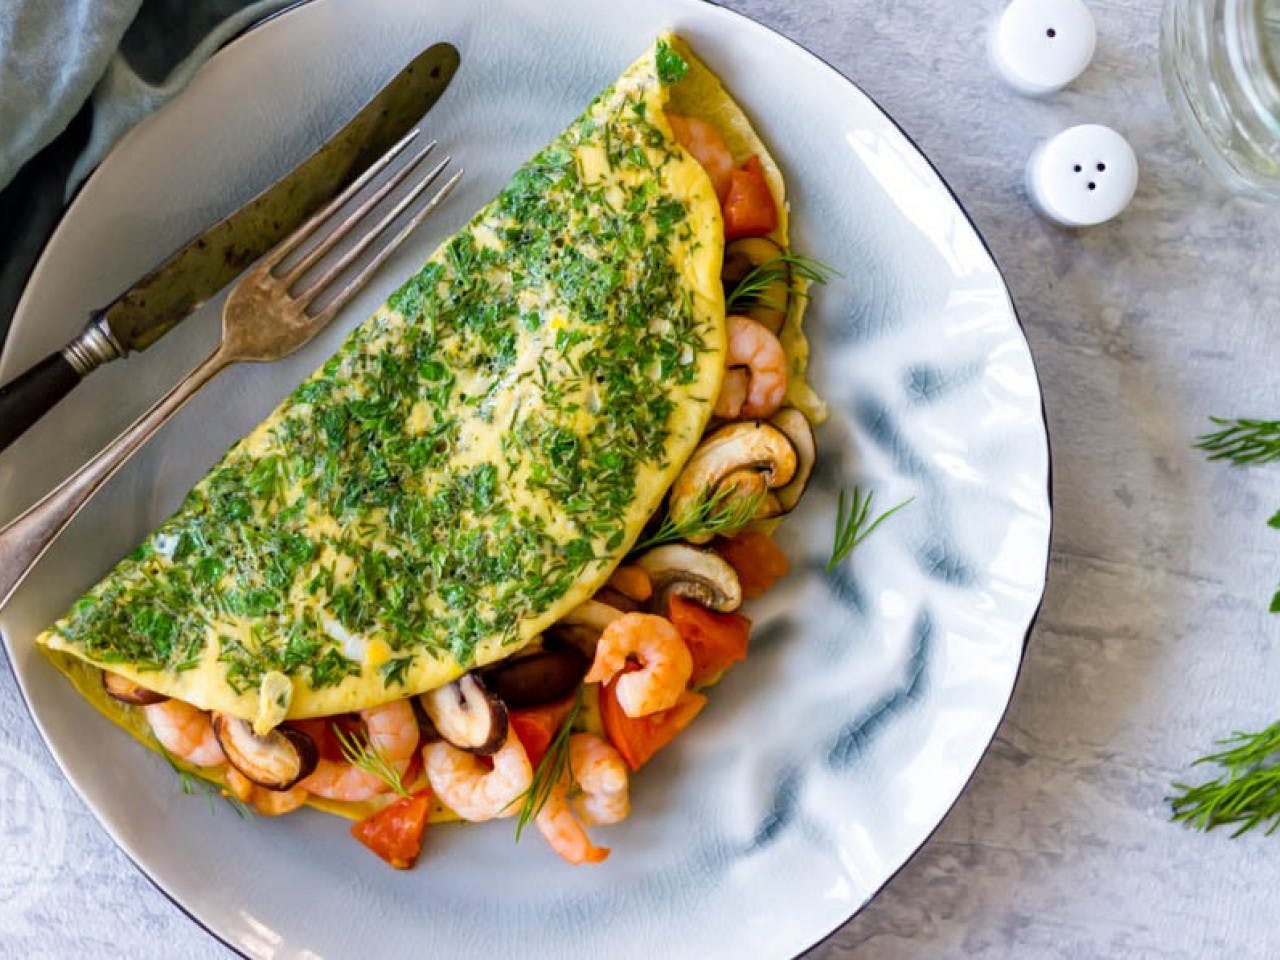 Herbal omelette with shrimps